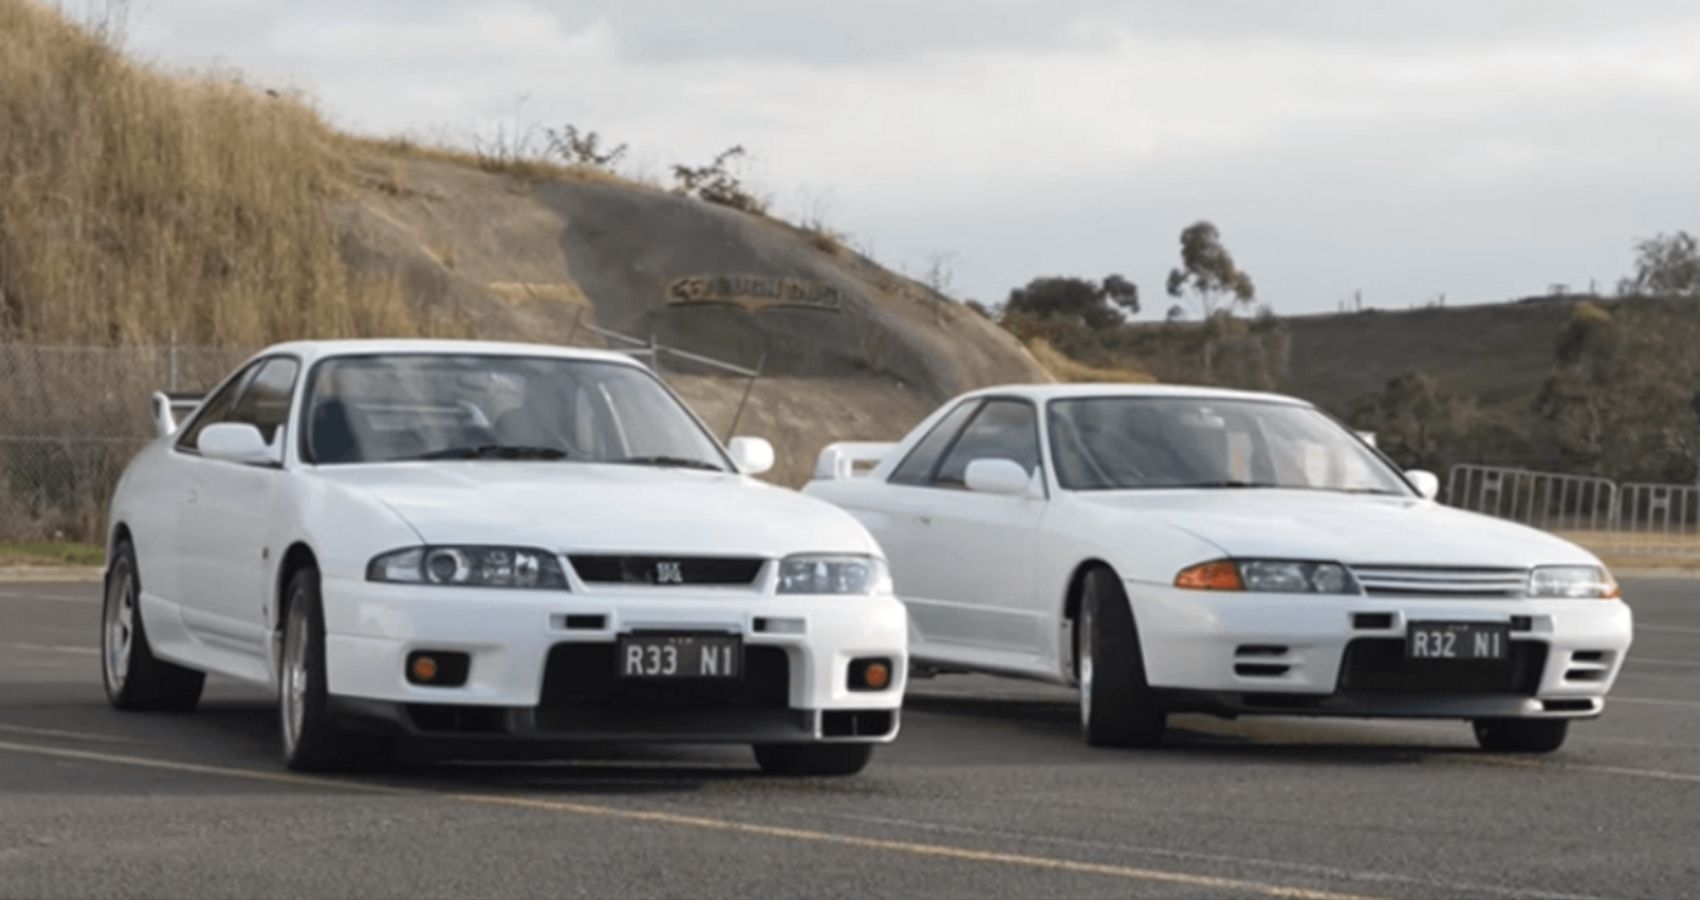 Nissan GT-R N1 Collection front view of the R33 and R32 N1